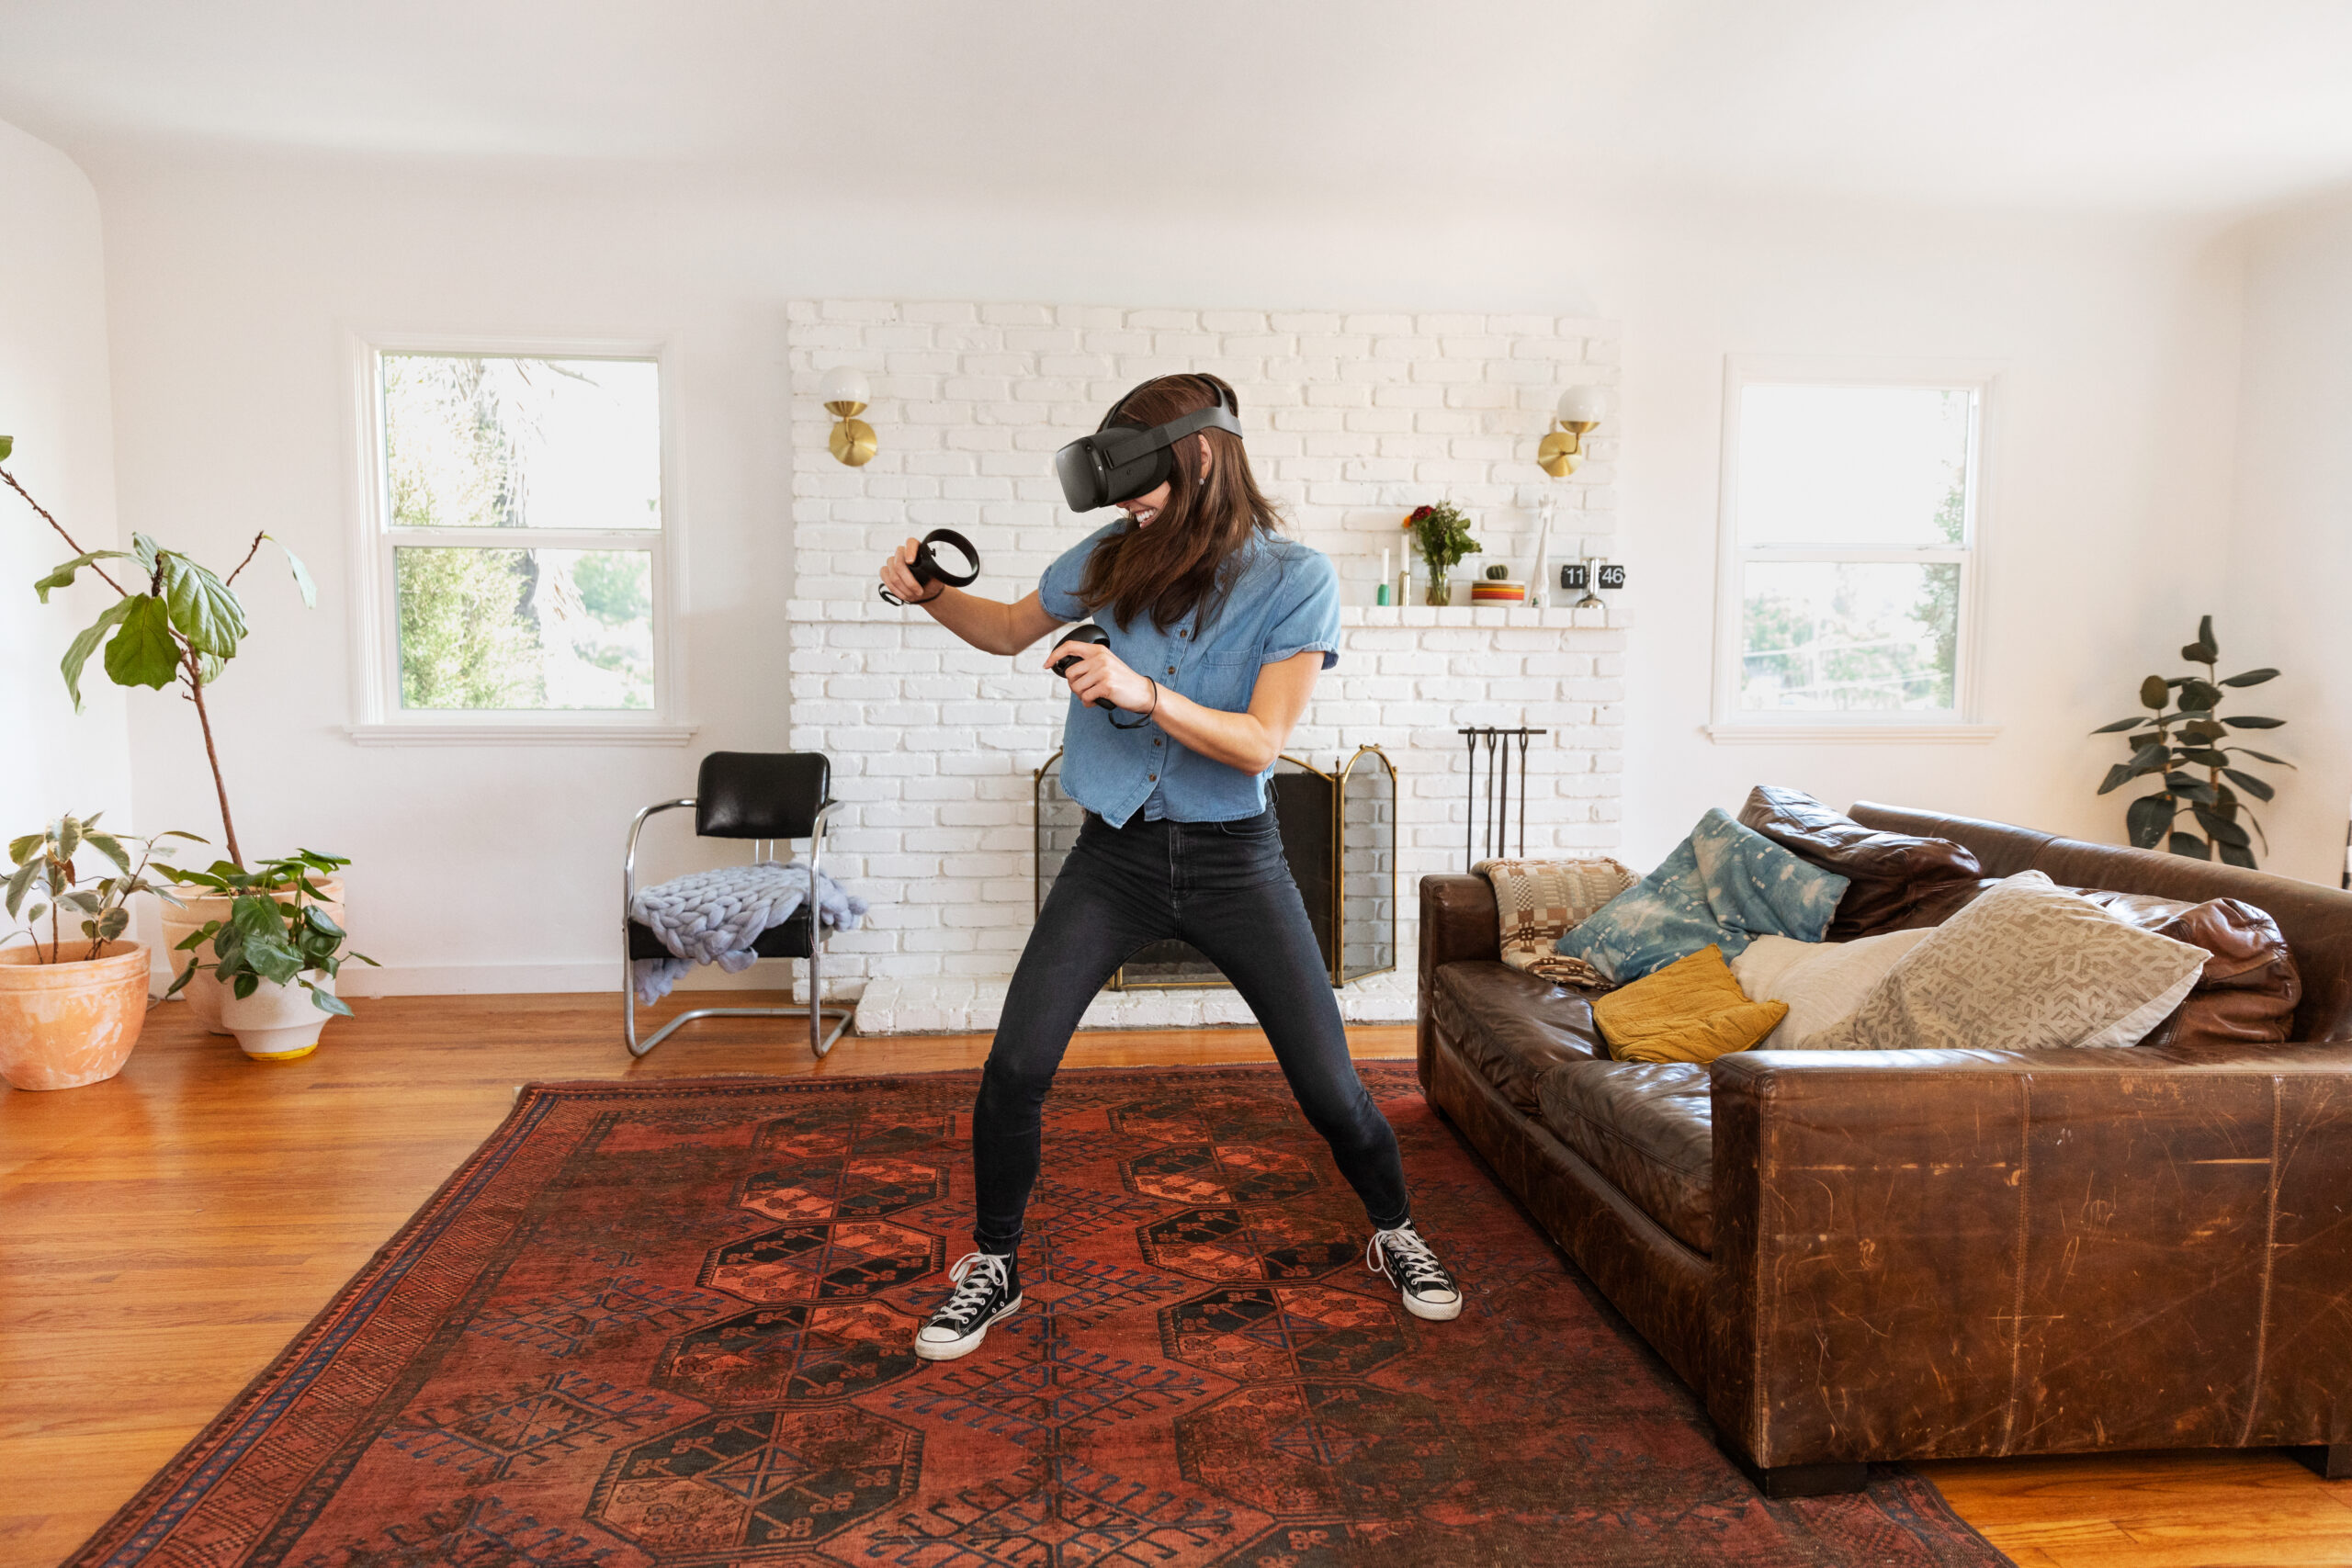 Oculus brings your real-world motion into VR. Here's what that's like.